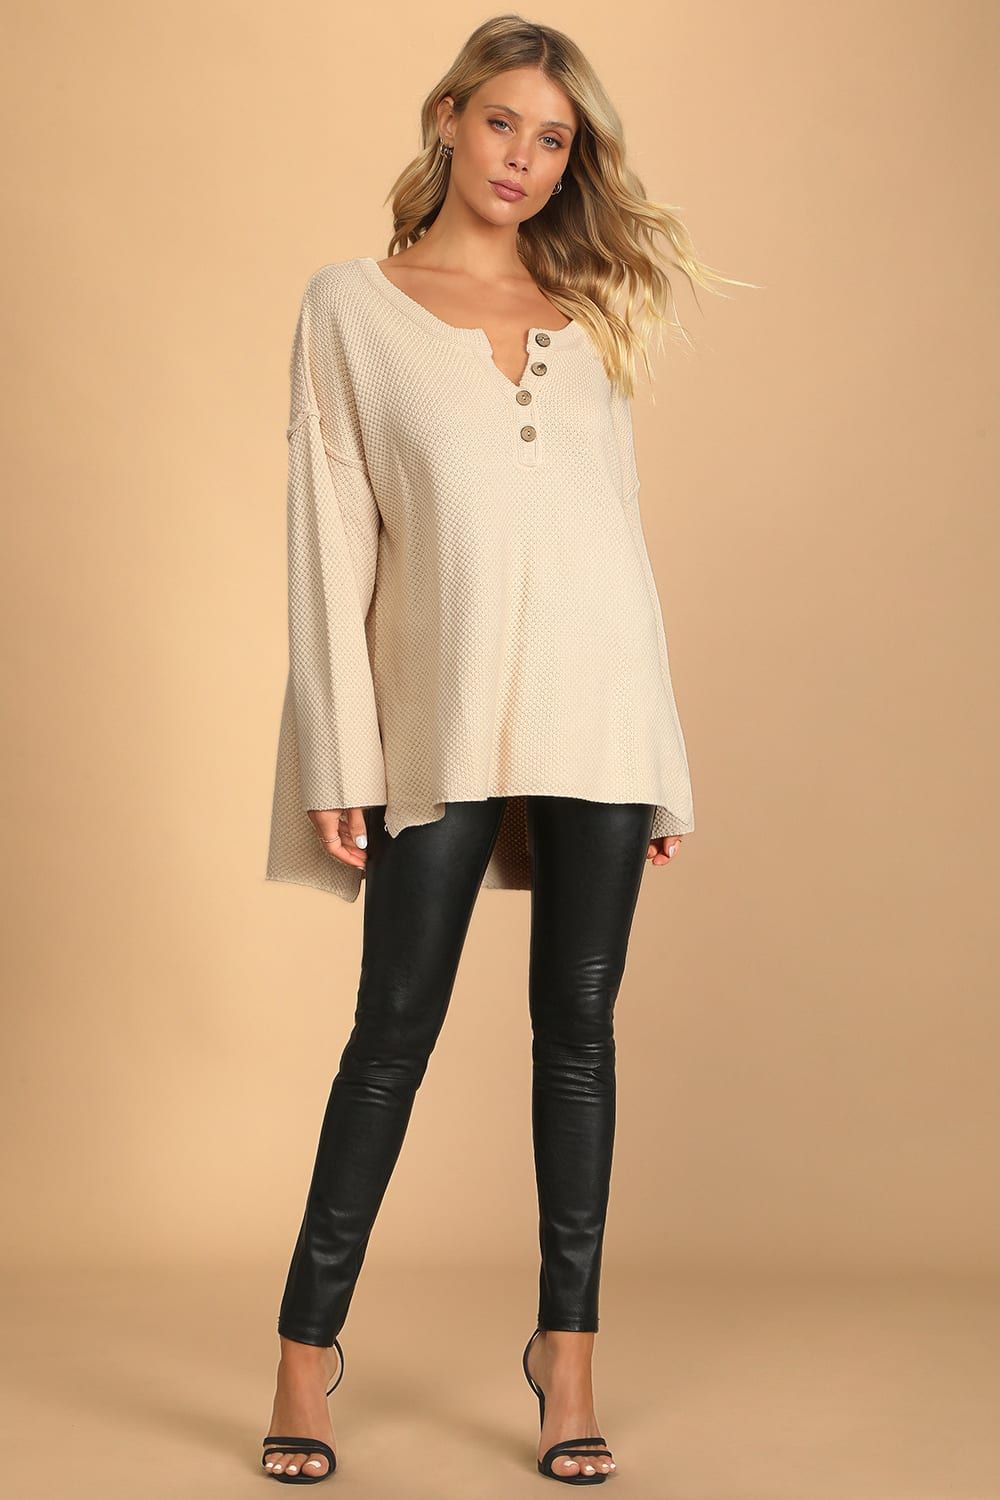 Cold Days Cream Knit Oversized Sweater Top | Lulus (US)